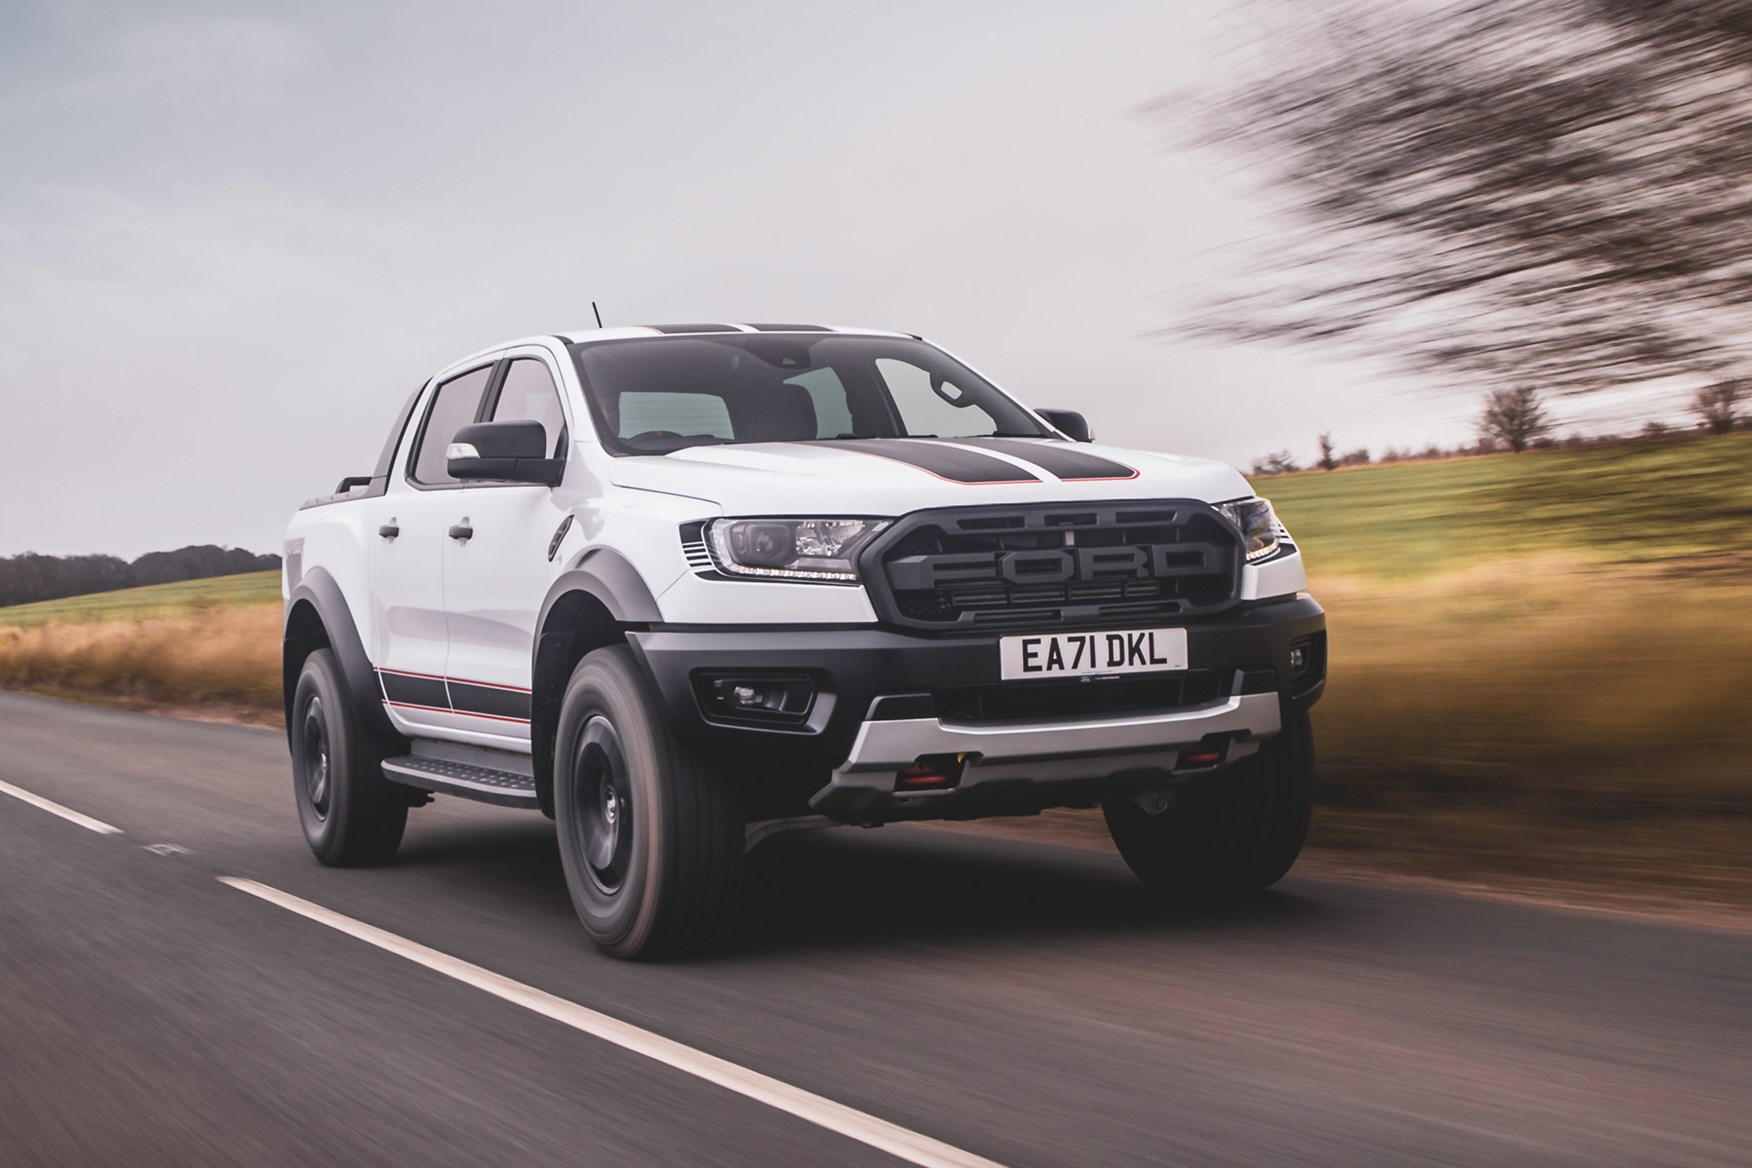 Ford Ranger Raptor review - Special Edition front view, driving fast